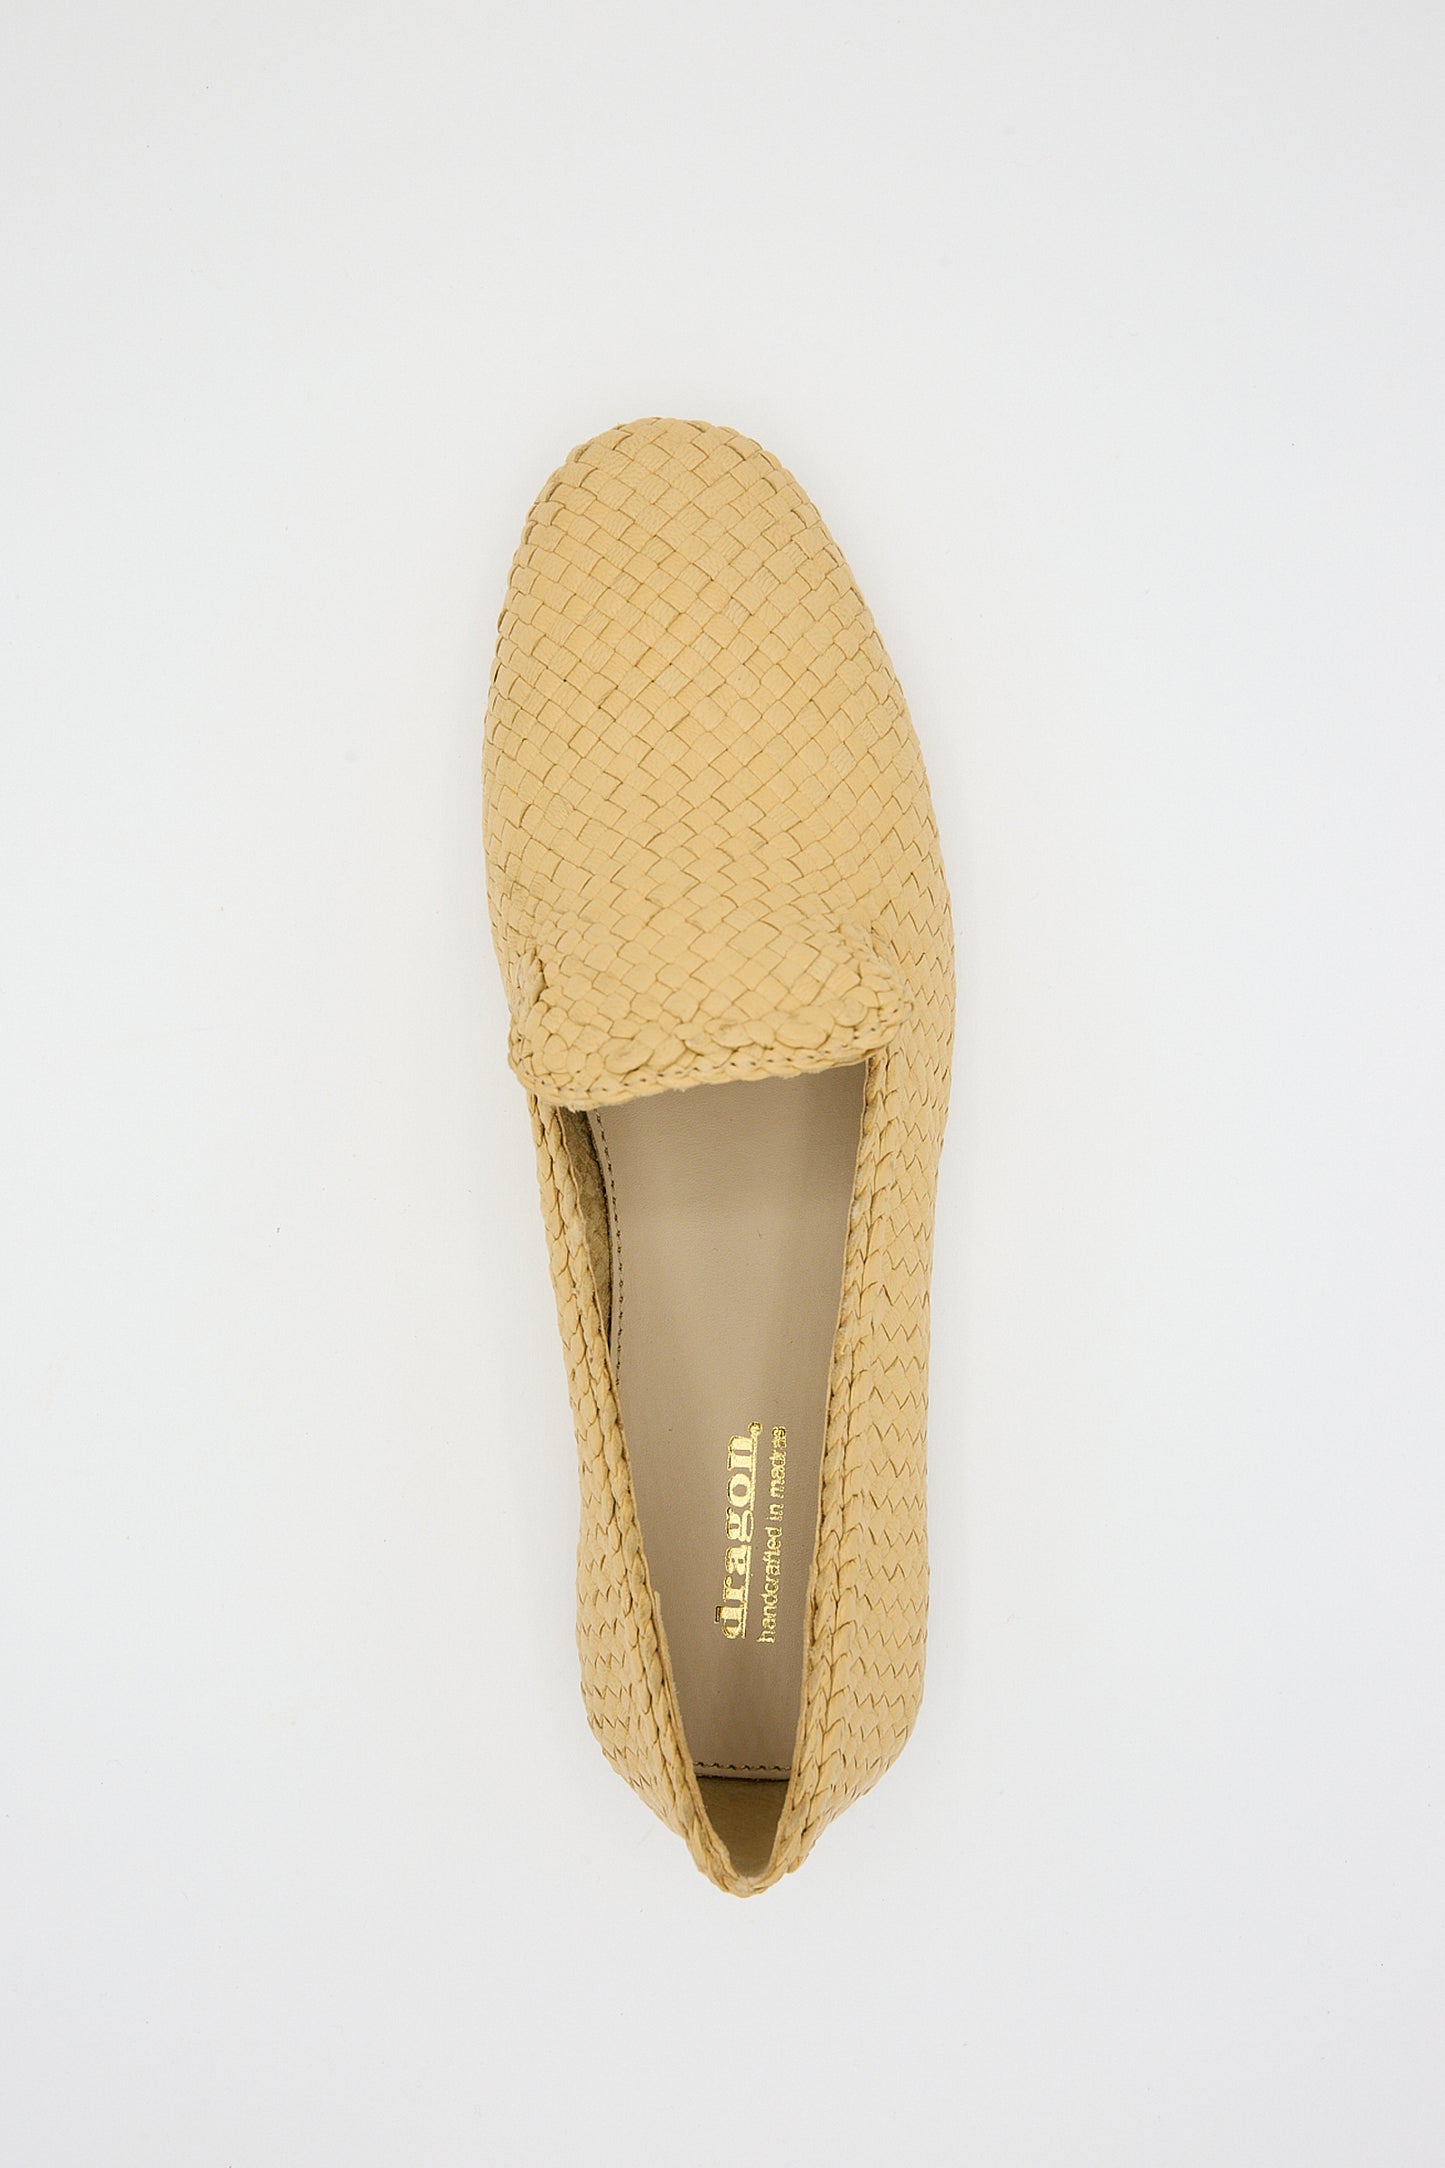 Handwoven goatskin leather Damas Slipper in Natural by Dragon Diffusion on a white background. Overhead view.